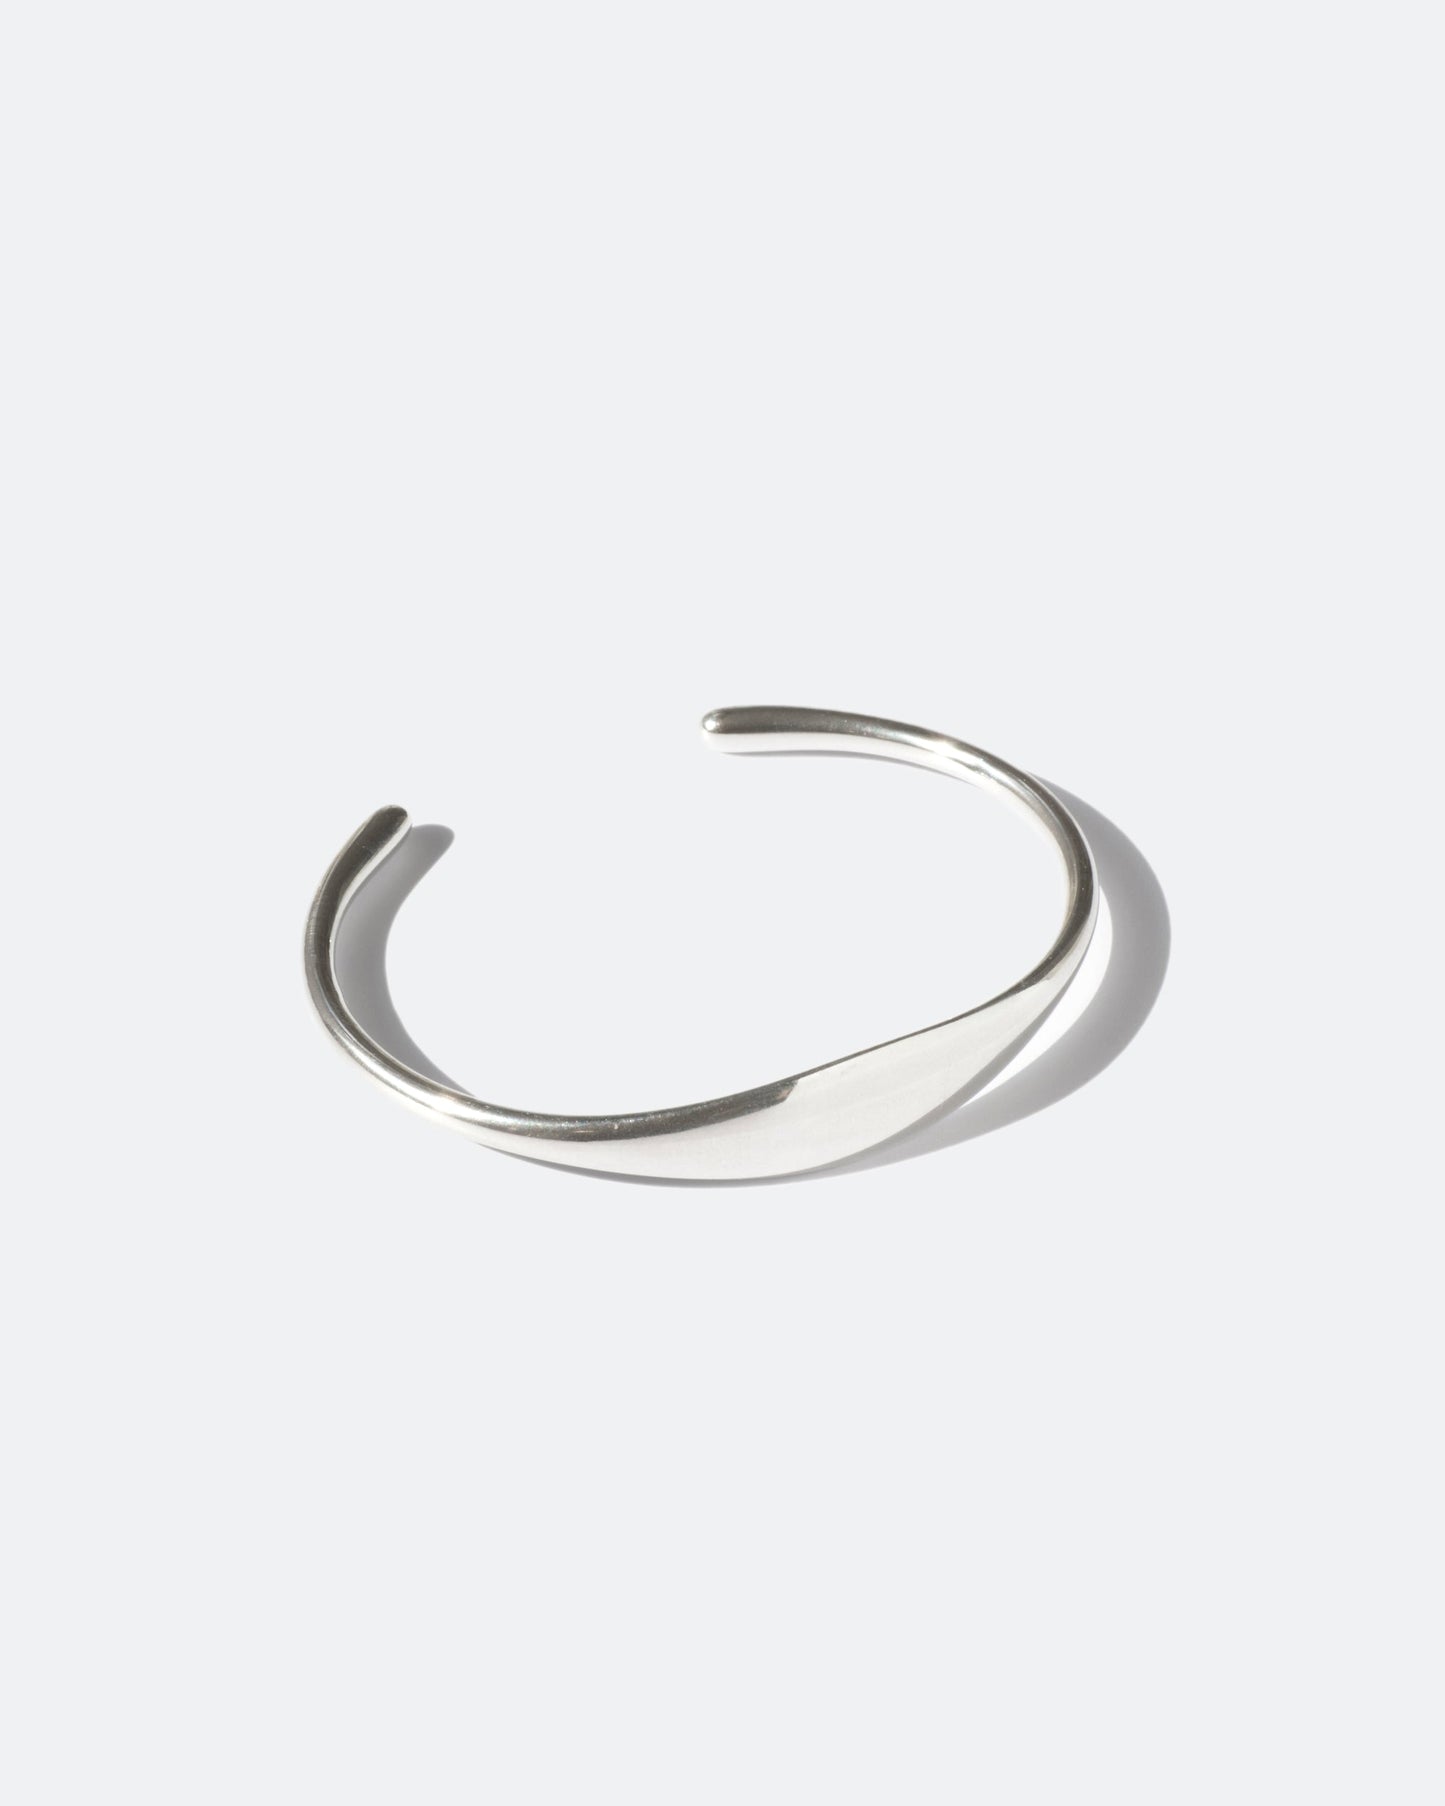 IDAMARI Drop Cuff in Sterling Silver available at Lahn.shop